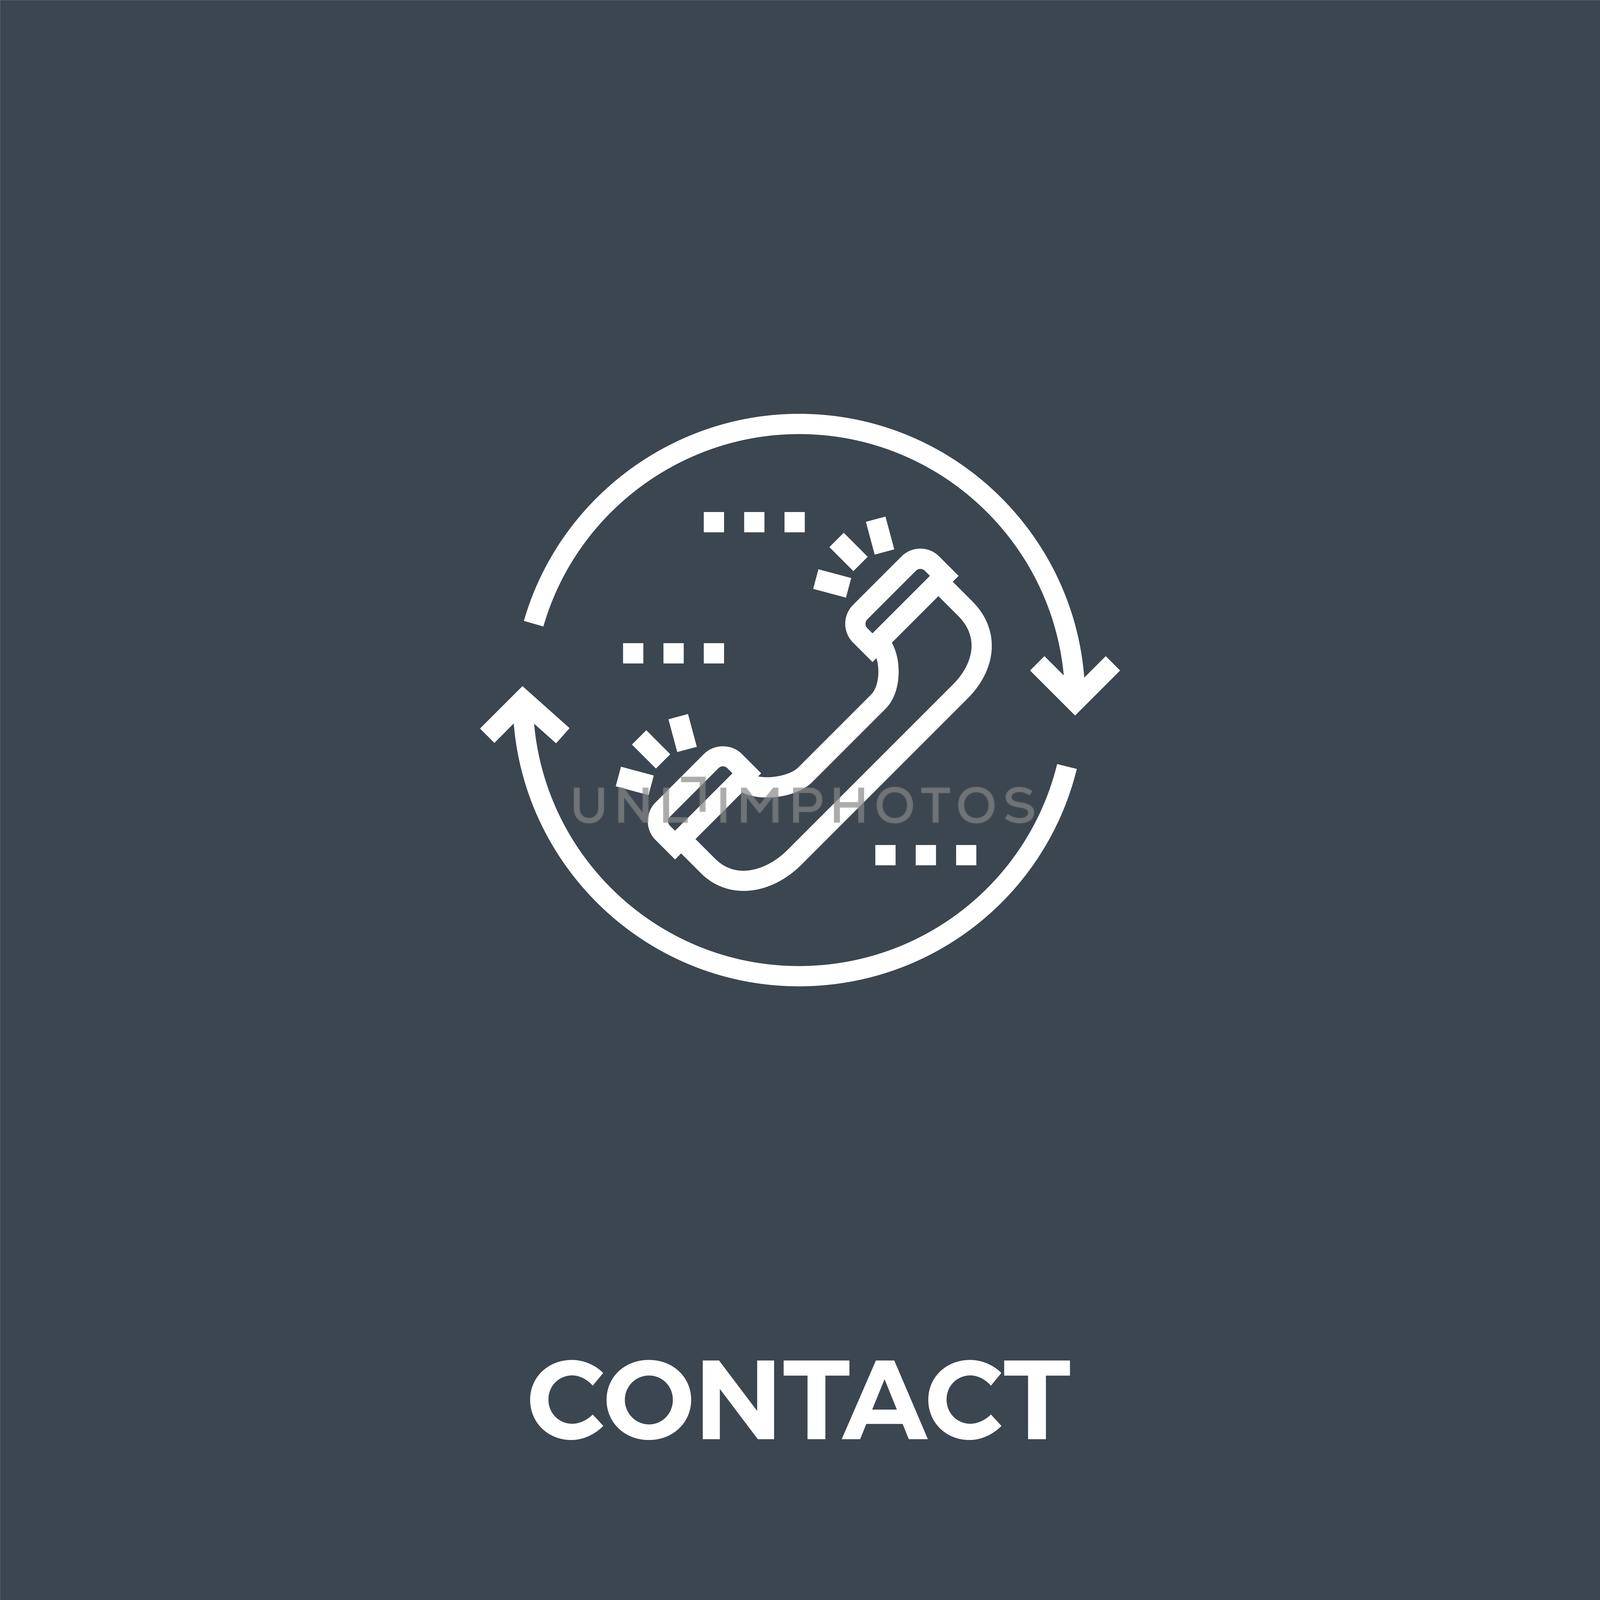 Contact Related Thin Line Icon. Isolated on Black Background. Editable Stroke. Illustration.